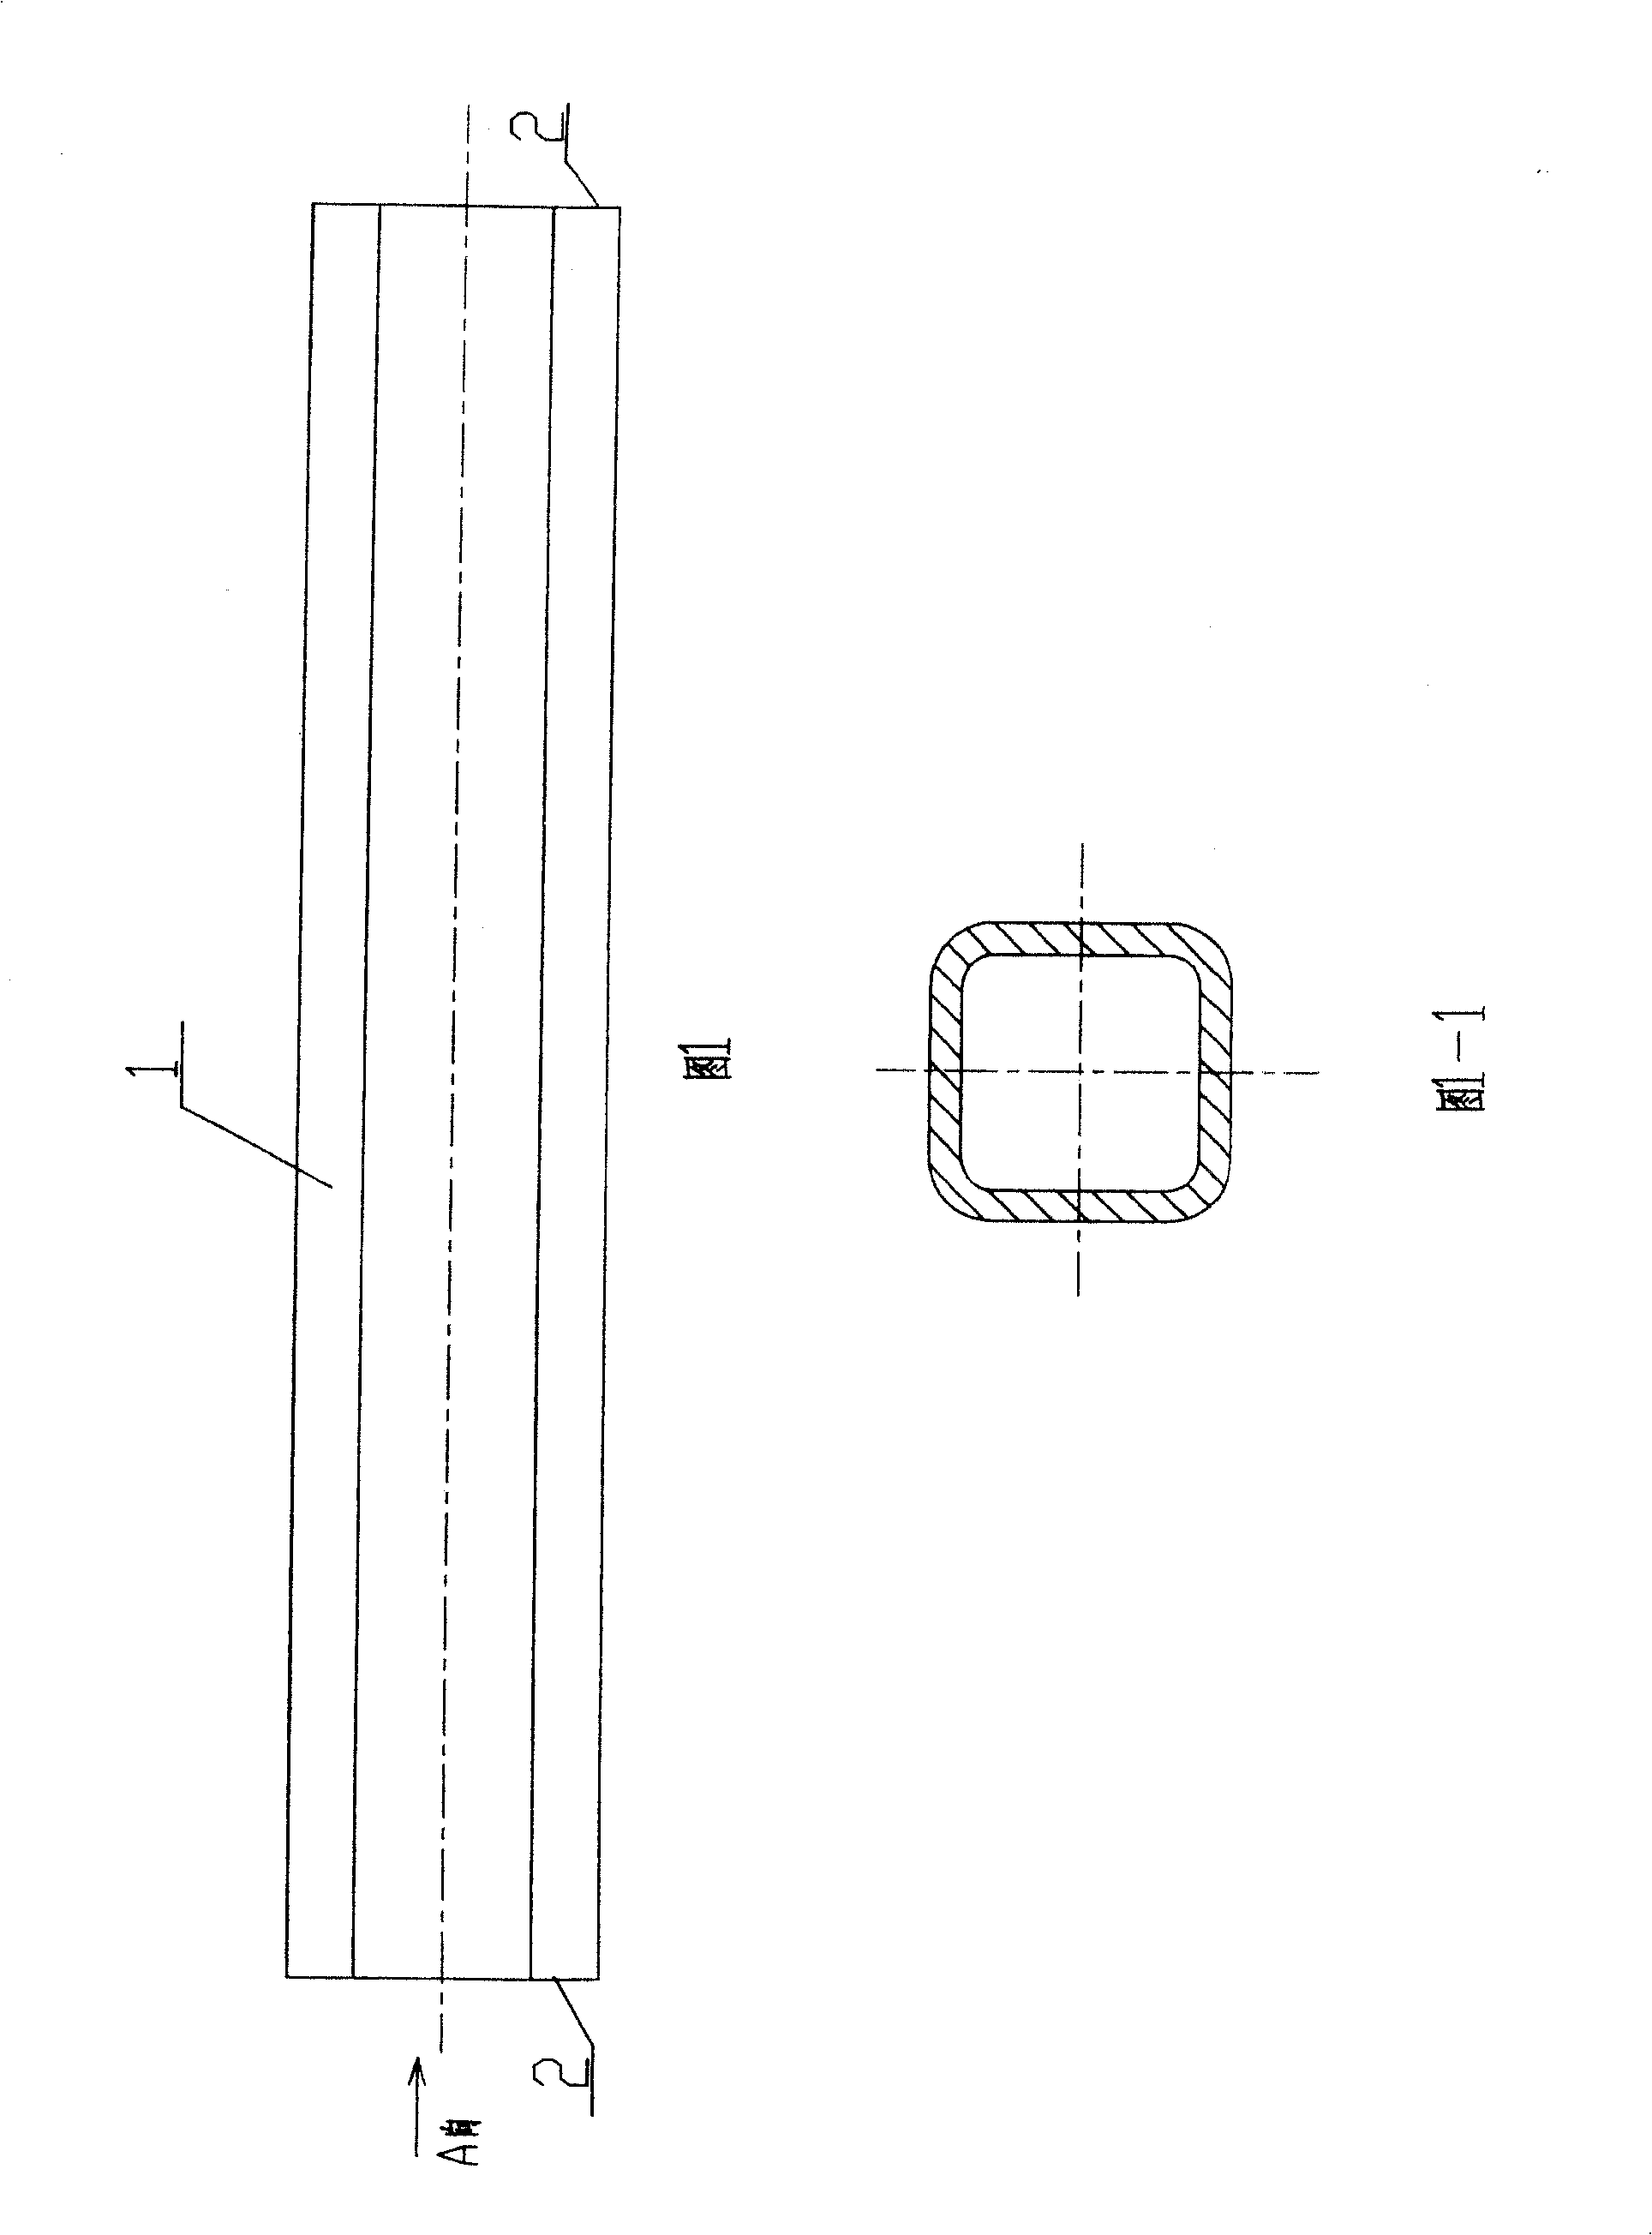 Vacuum electron beam welding process for square axle journal and axle pipe of support axle